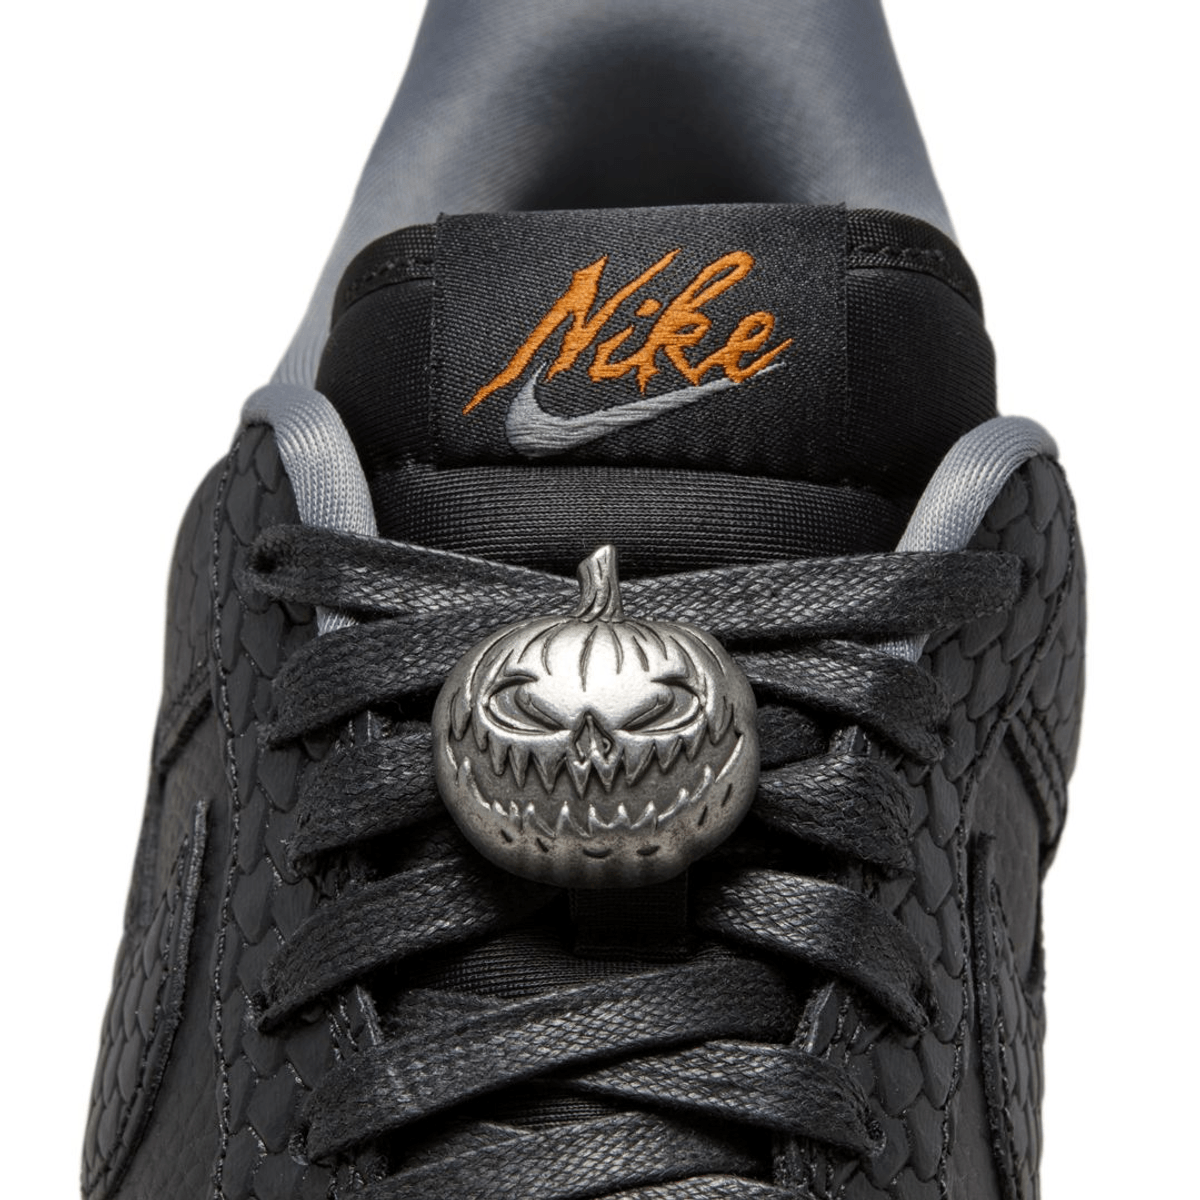 Nike Air Force 1 Low “Halloween” Has Some Trick And Treats Up Its Sleeve